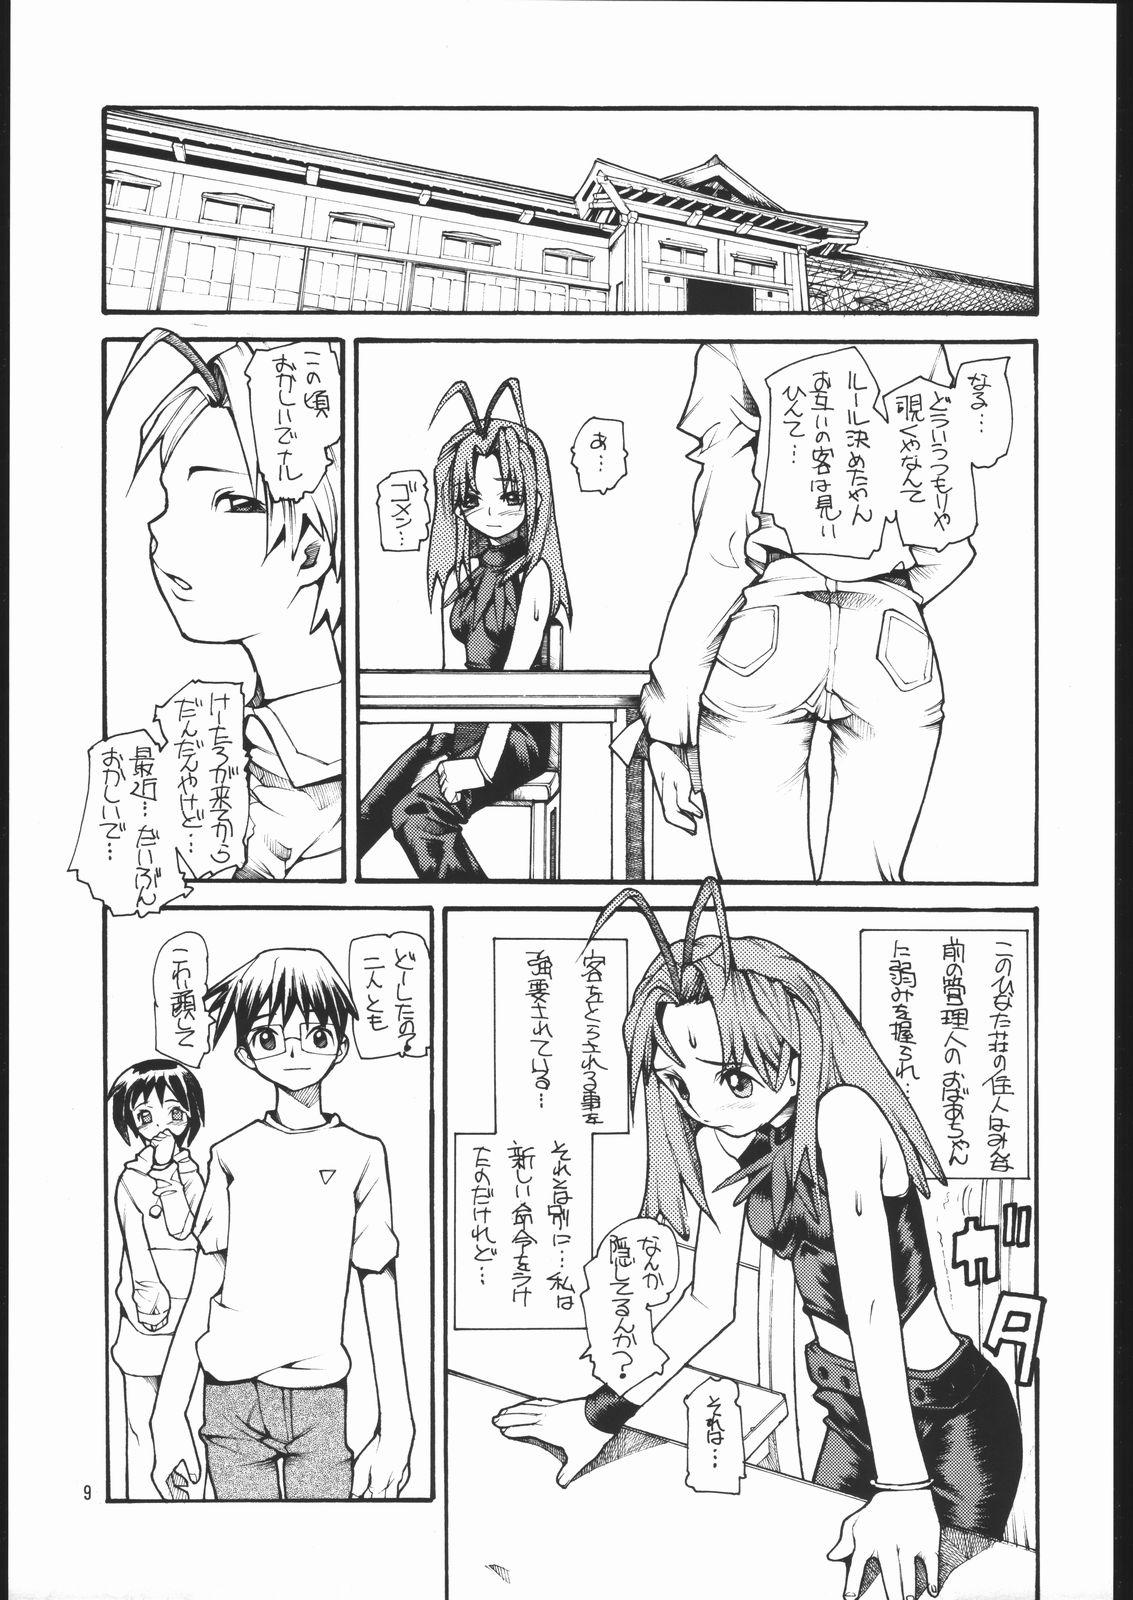 Natural Boobs HR6 | Hyper Resturant 6 - Love hina Amatuer - Page 8